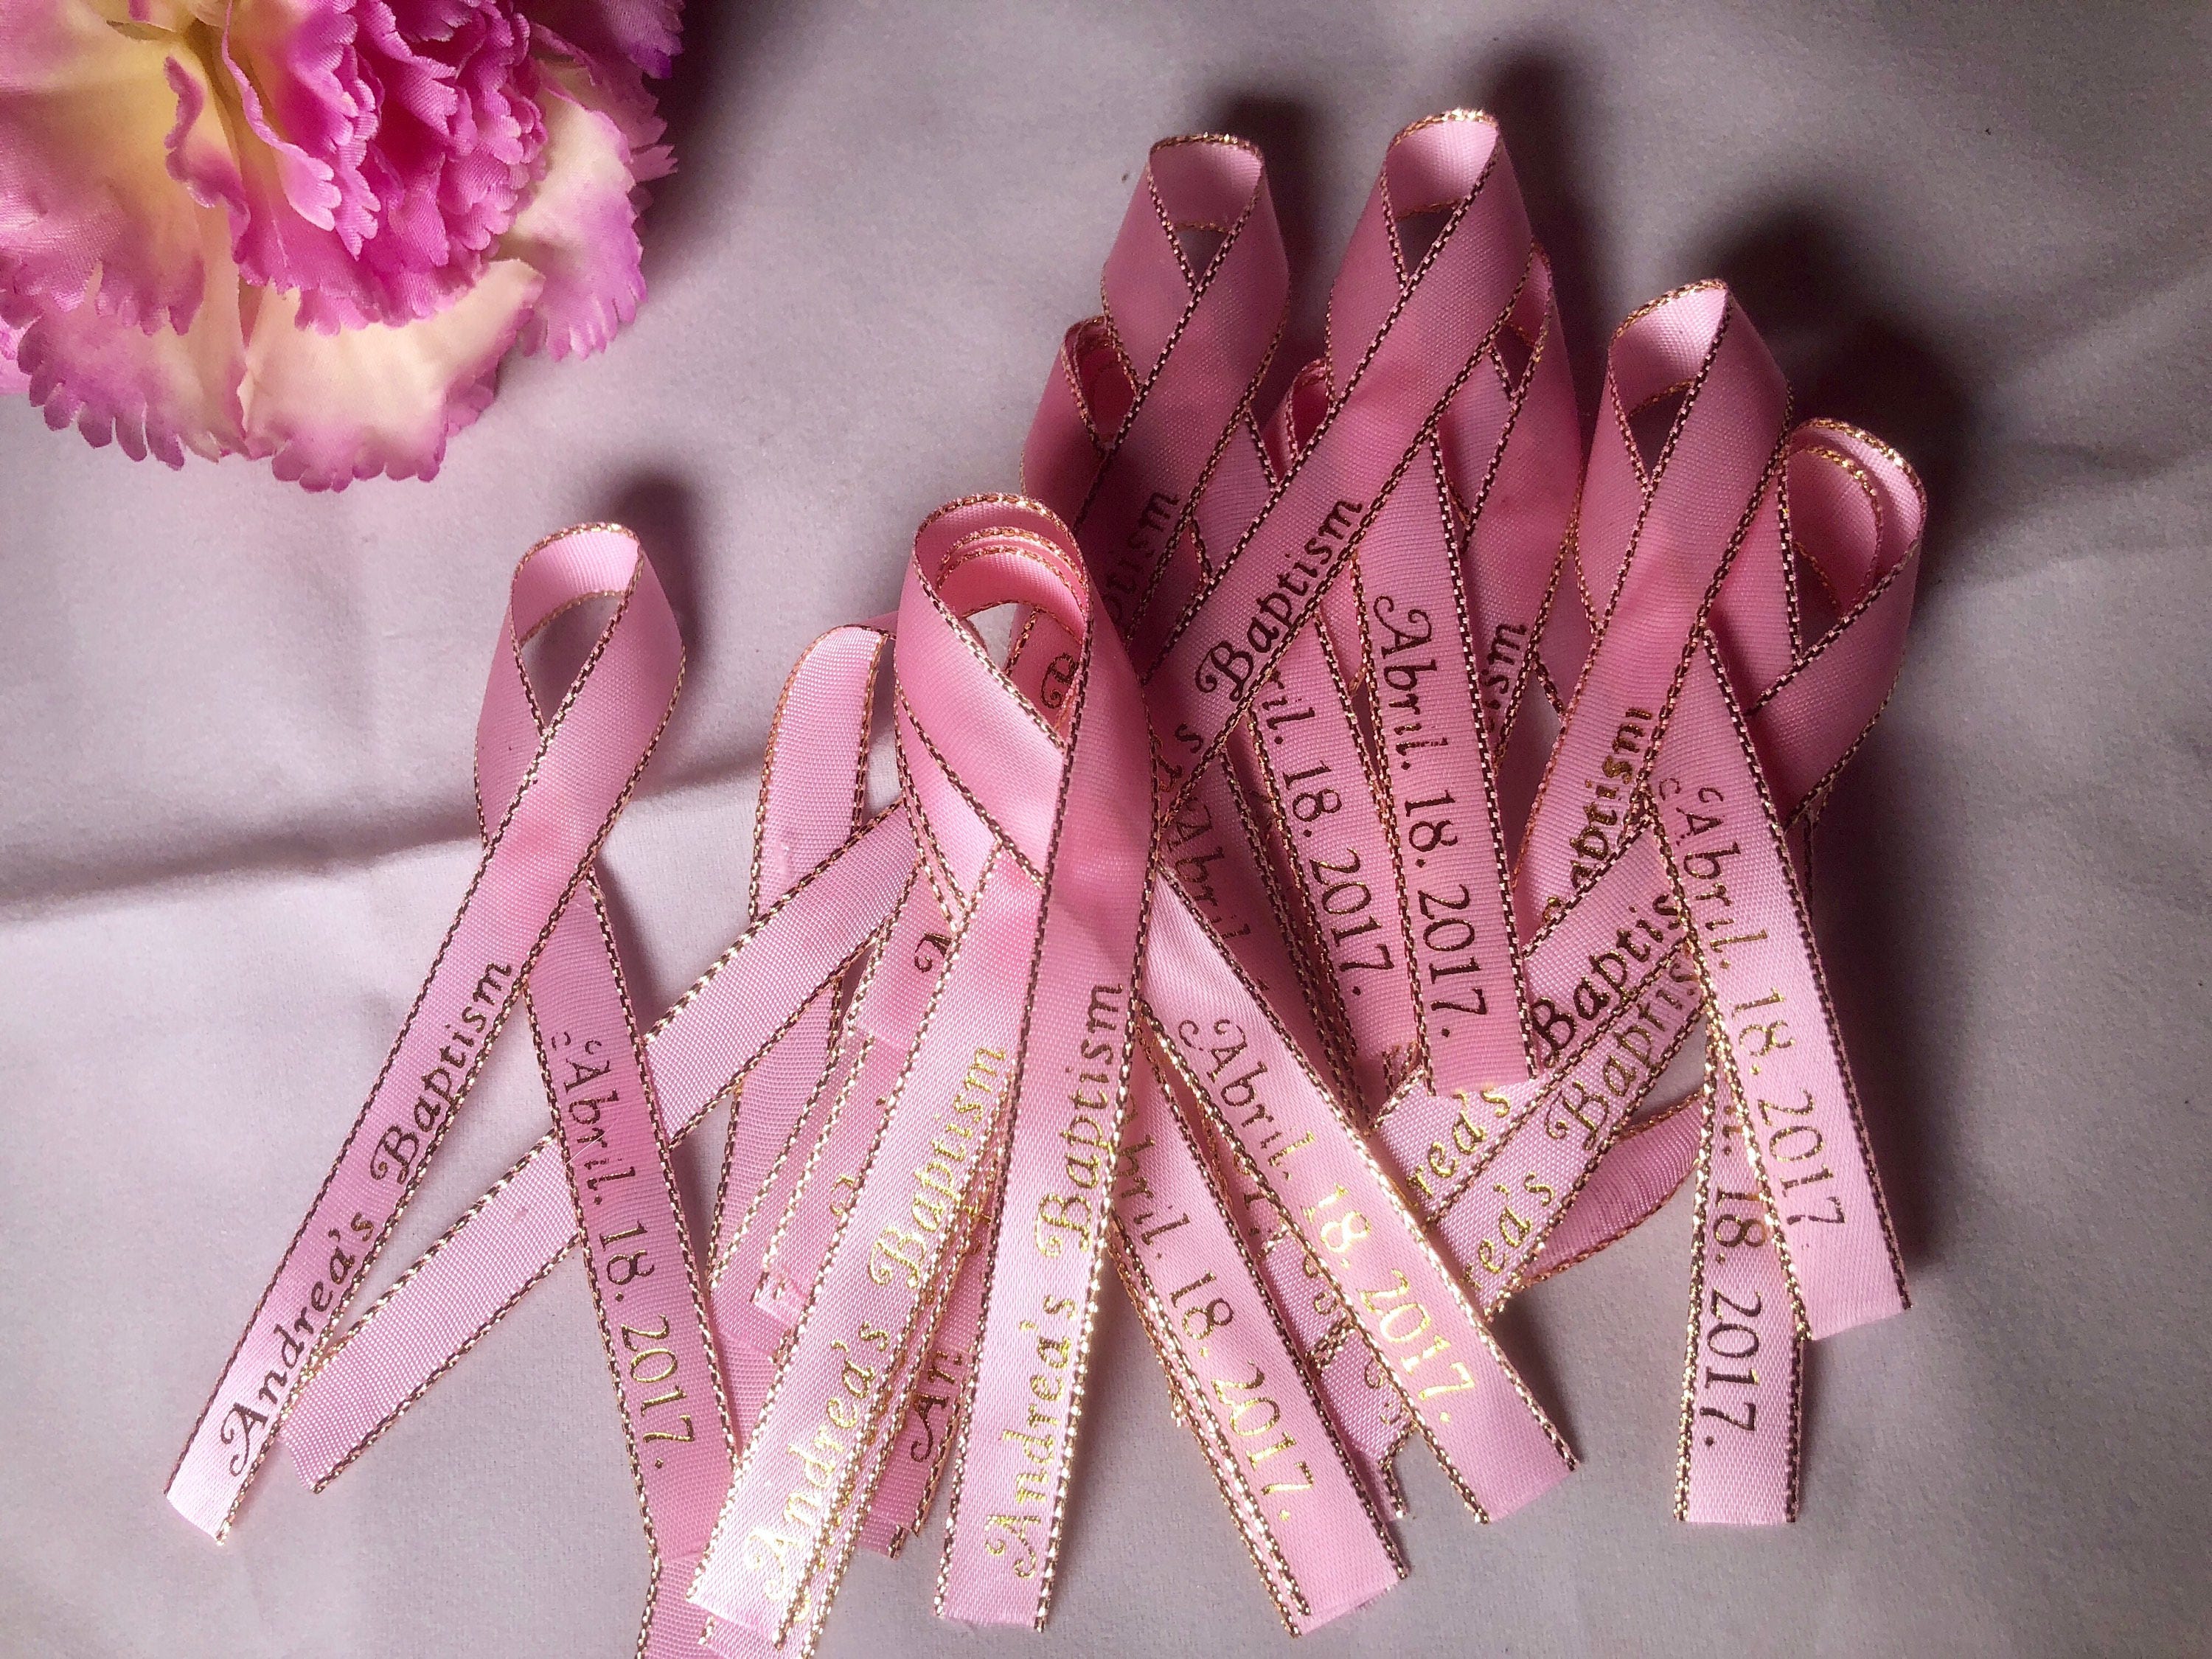 Personalized Ribbons for Wedding Bridal Shower Baby Shower Celebration  Party Favor Custom Wording Assembled for Gifts Pack of 25 